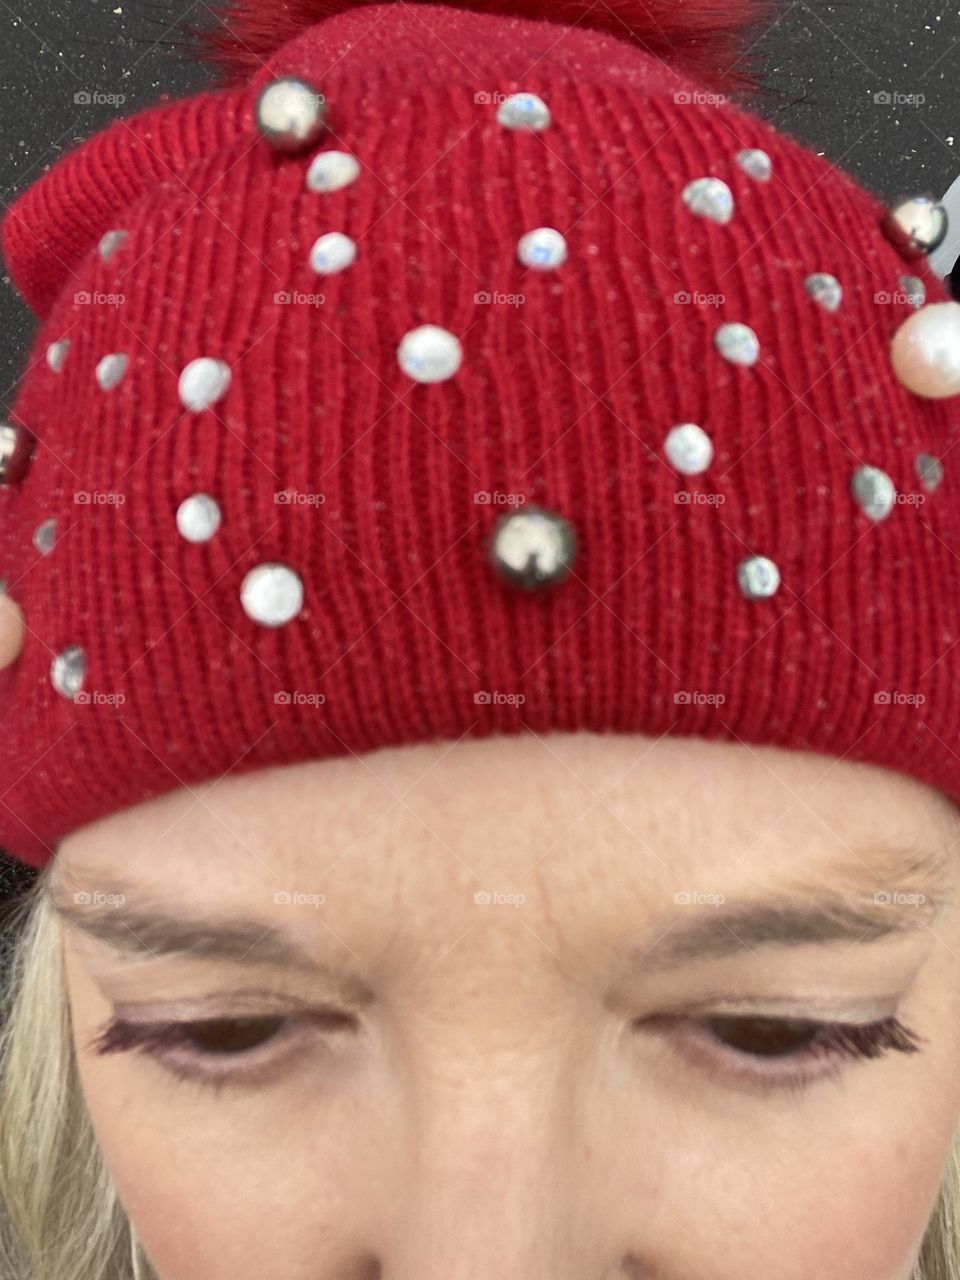 Me wearing L’Oréal Voluminous Mascara in “Deep Violet” on my lashes. On my lids is Bare Minerals eye color in “Queen Phyllis,” a gold-toned shade. On my head is a festive red hat given to me by a friend last Christmas. 